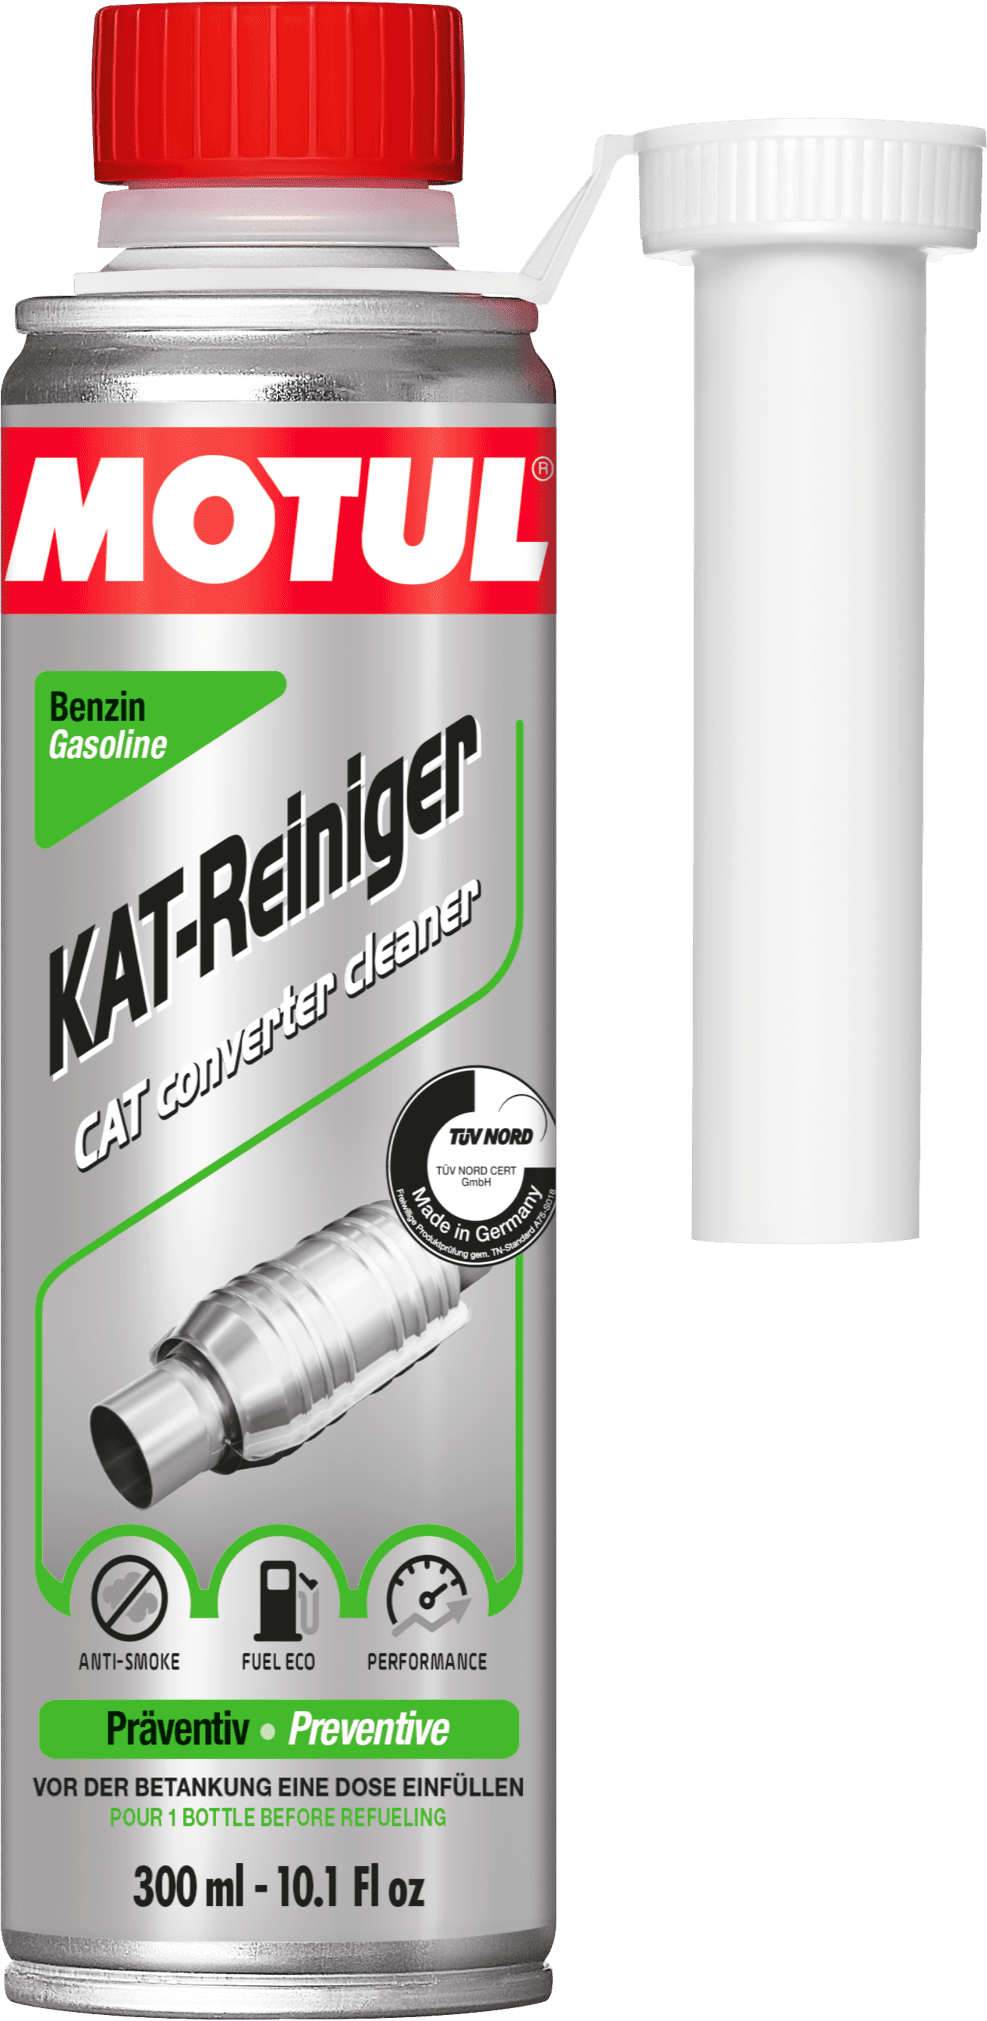 110678-300ML MOTUL Cat Converter Cleaner is a cleaner additive designed to be used in all types of Gasoline engine catalytic converters, oxidation catalysts and TWC - Three Way Catalytic converters.